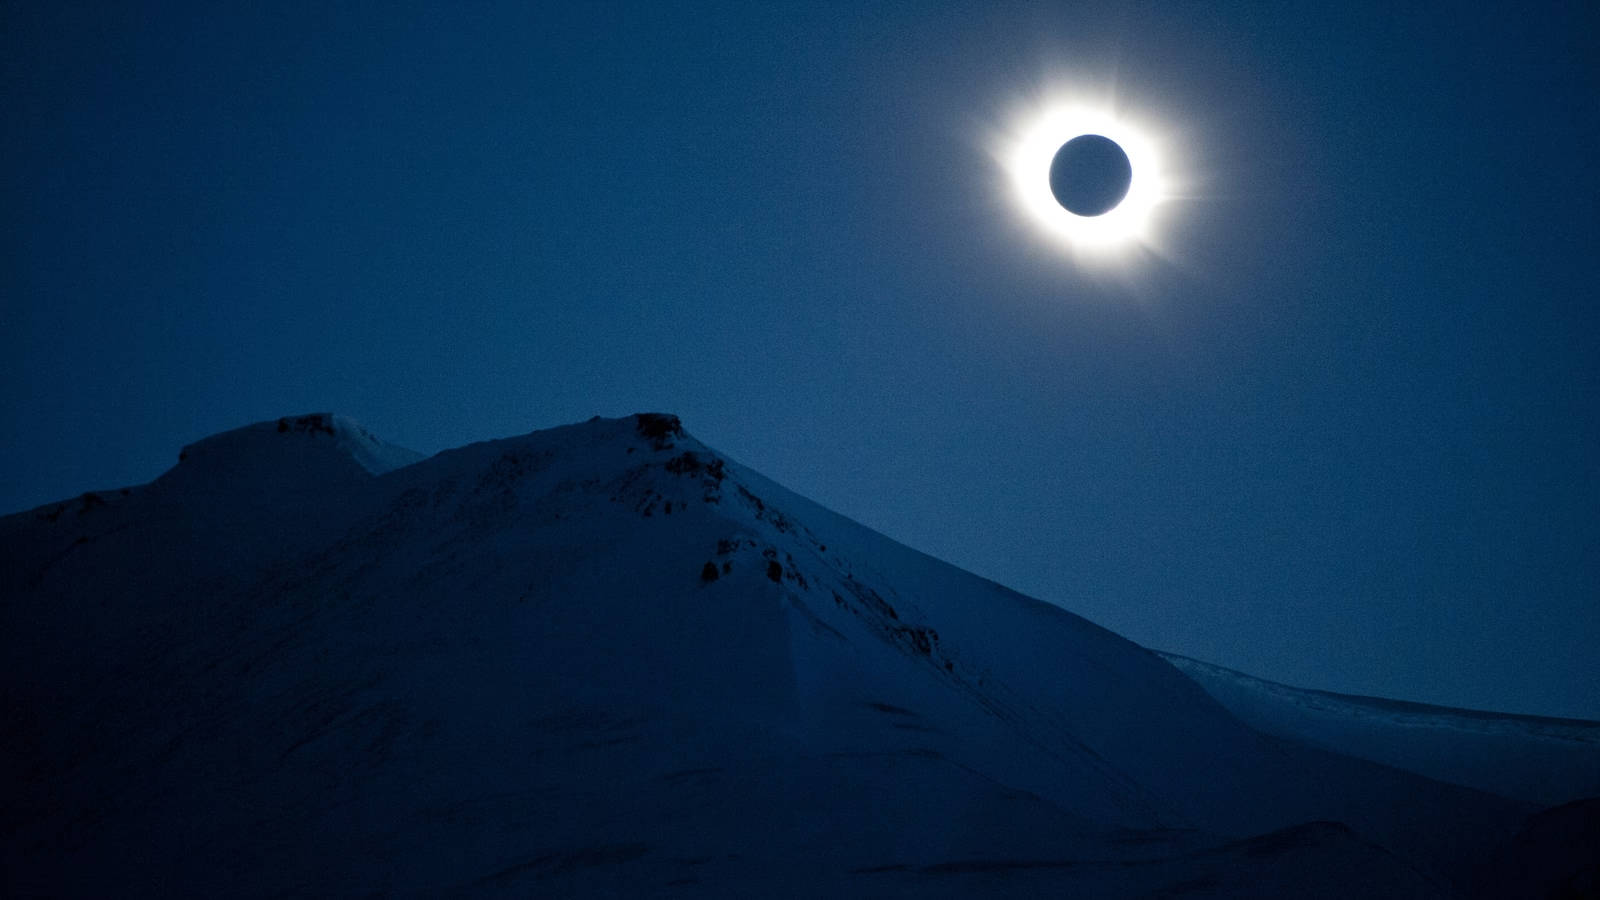 Solar Eclipse Over Snow-Capped Mountain Wallpaper